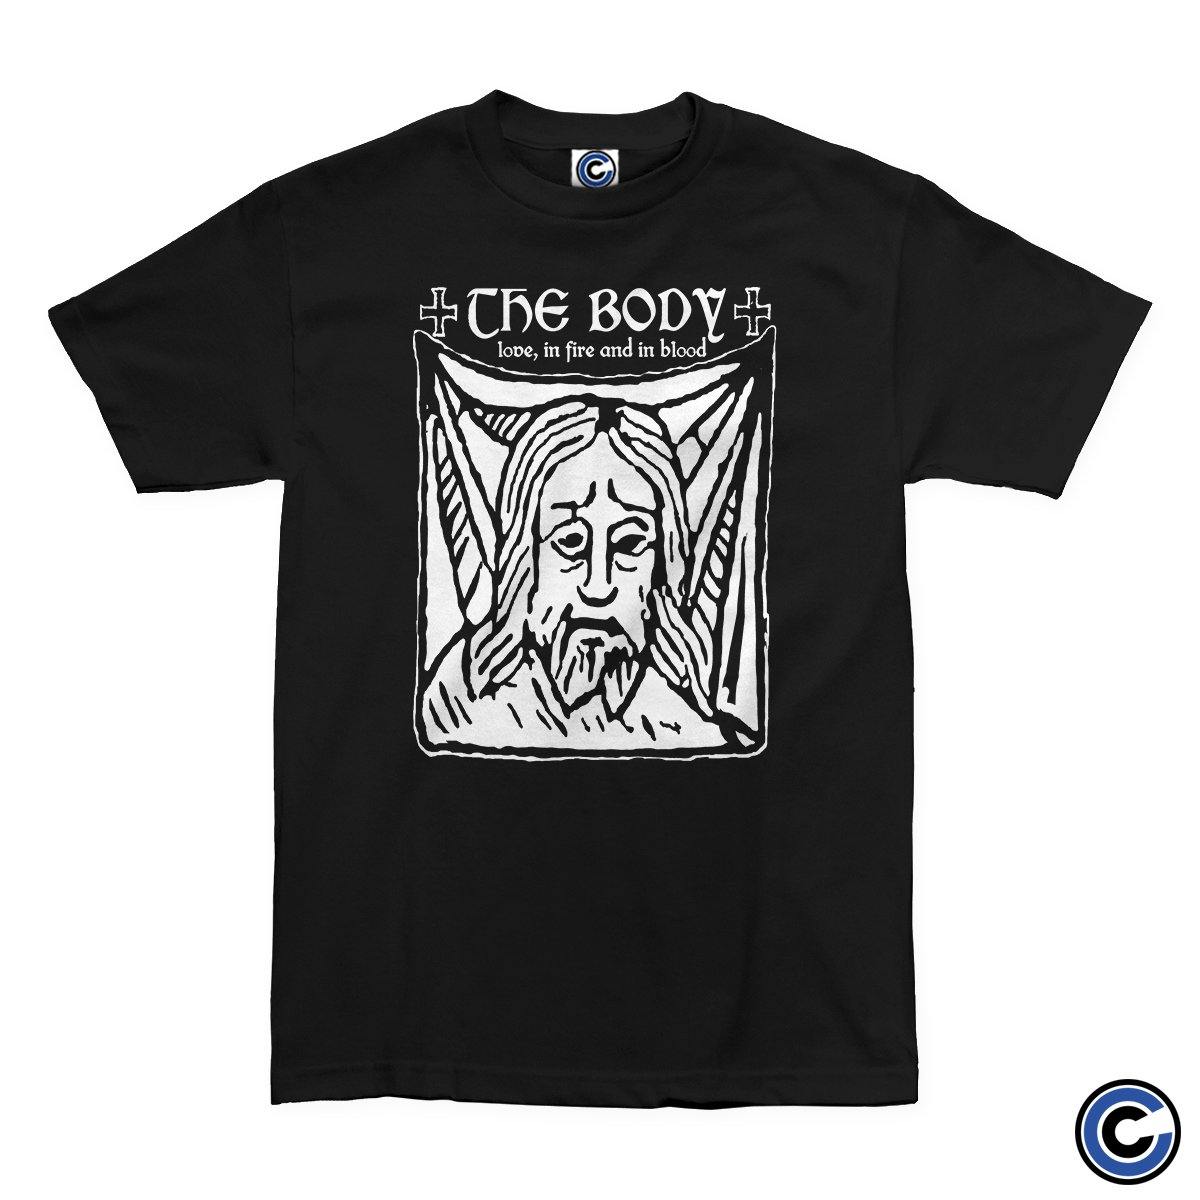 Buy – The Body "Fire And Blood" Shirt – Band & Music Merch – Cold Cuts Merch